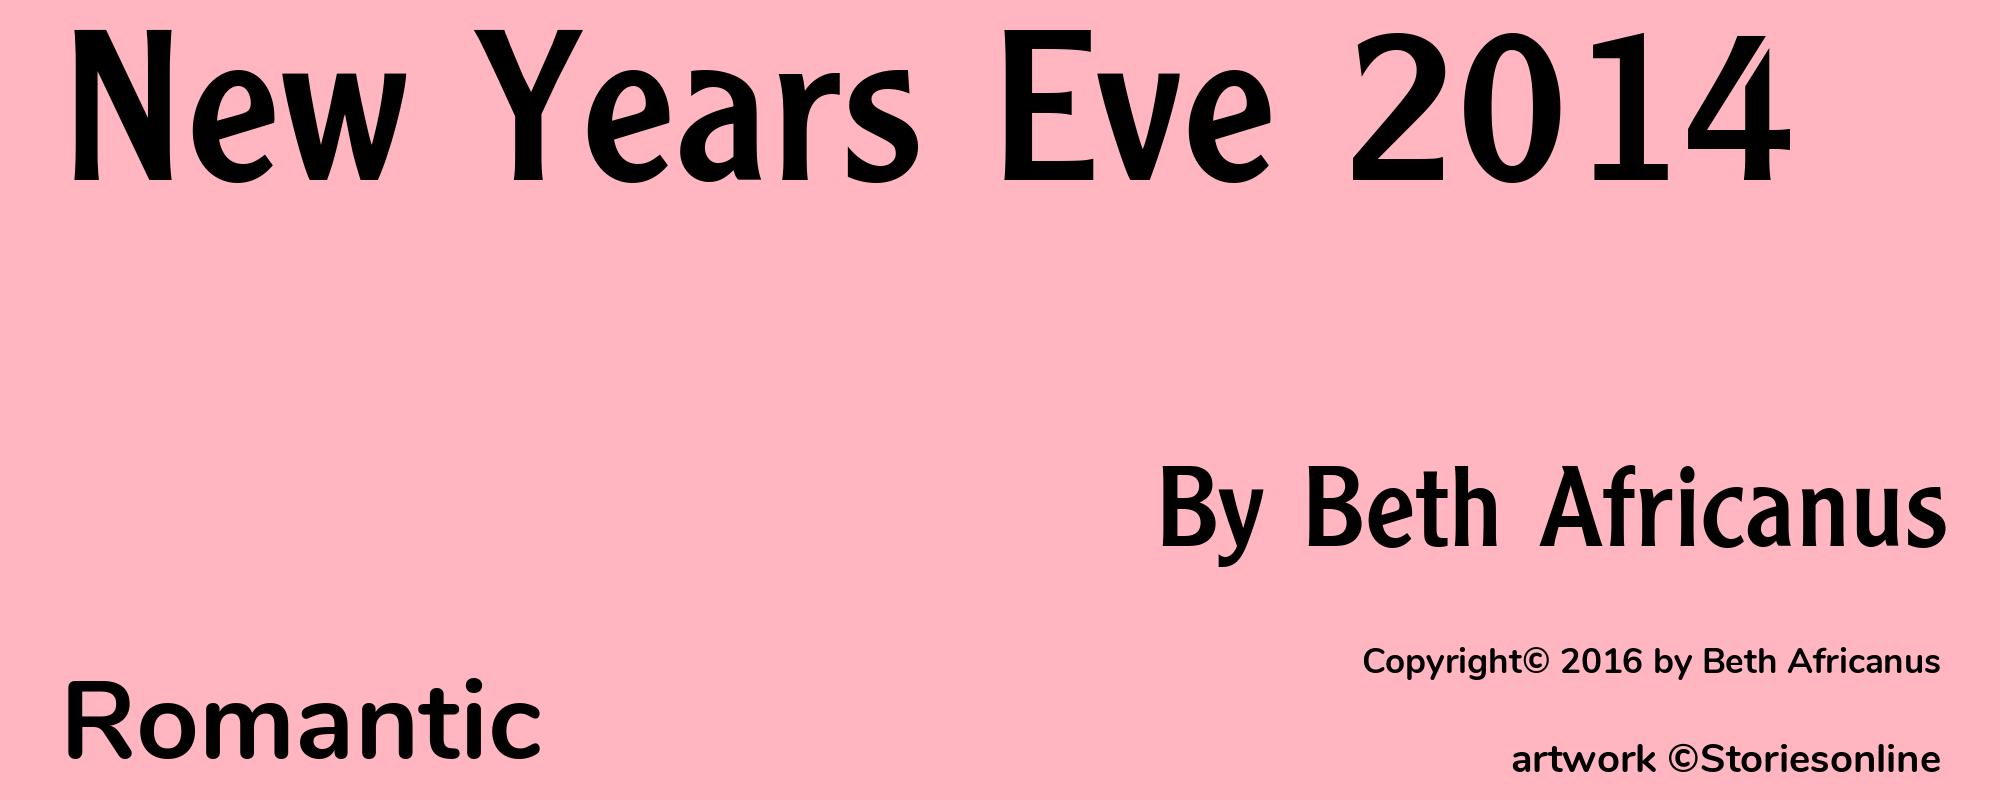 New Years Eve 2014 - Cover